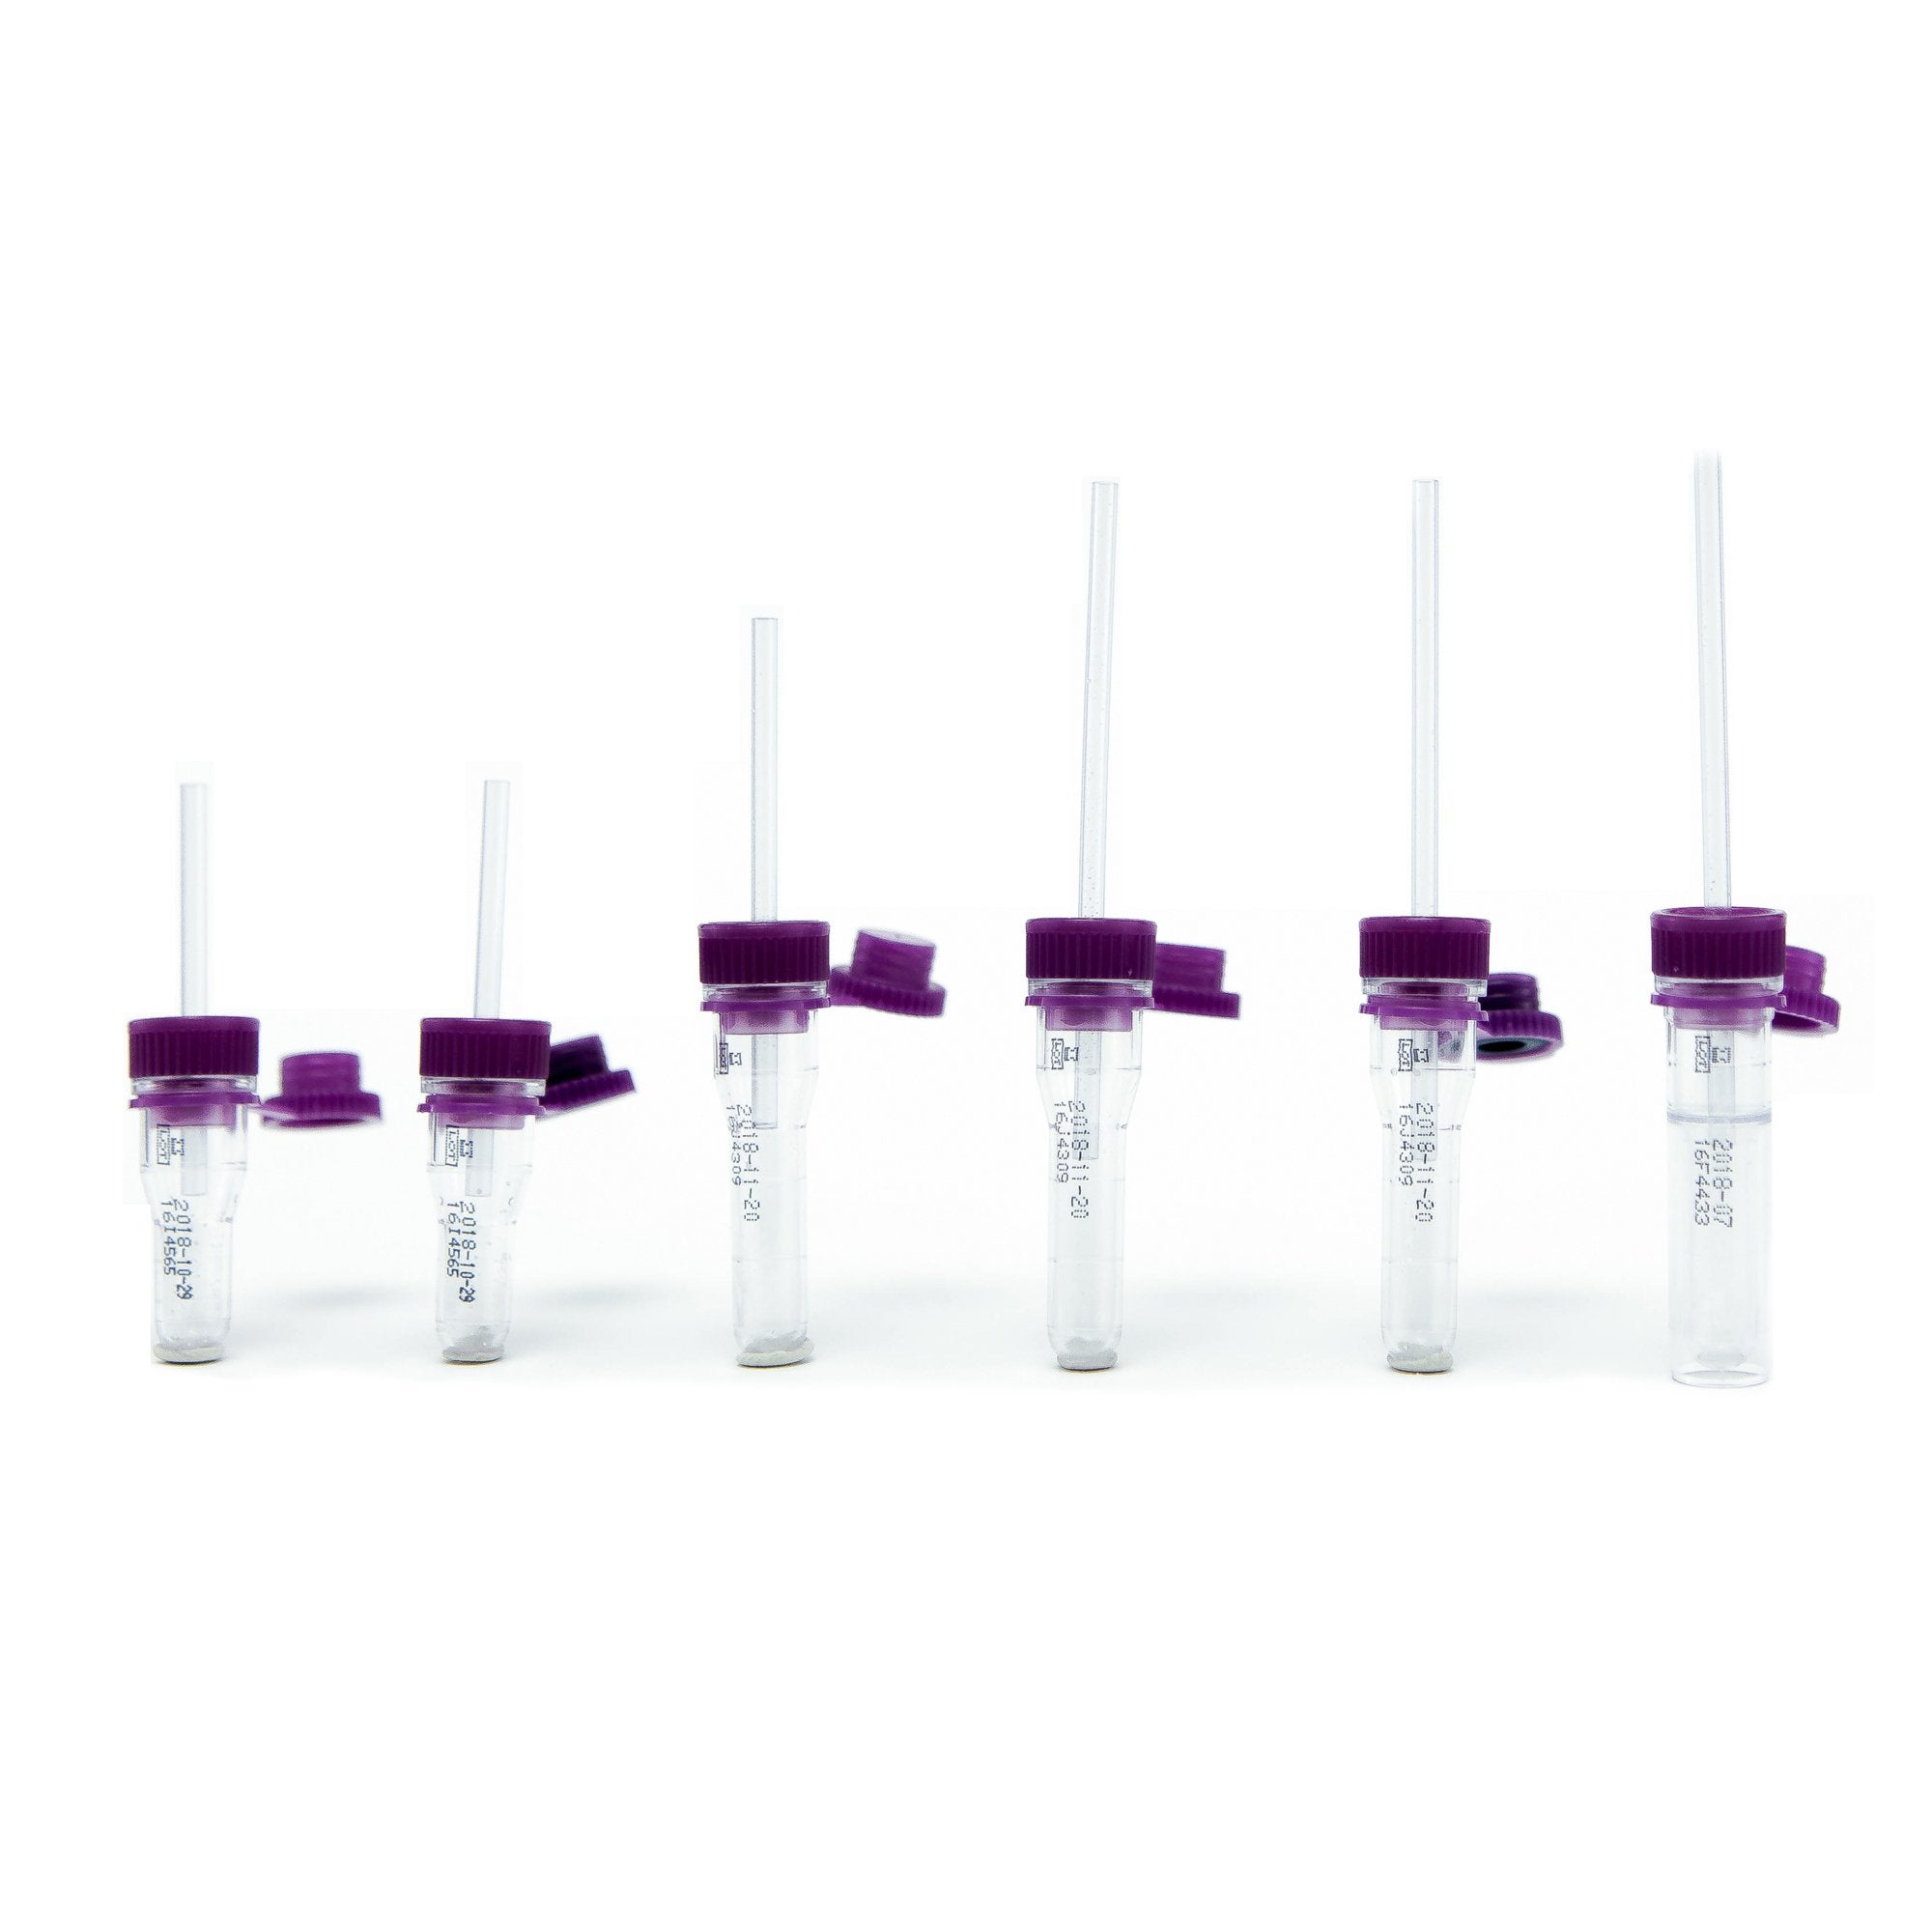 Safe-T-Fill Capillary Blood Collection Tube Whole Blood Tube K2 EDTA Additive 1.1 mm Diameter 125 L Purple Pierceable Attached Cap Plastic Tube